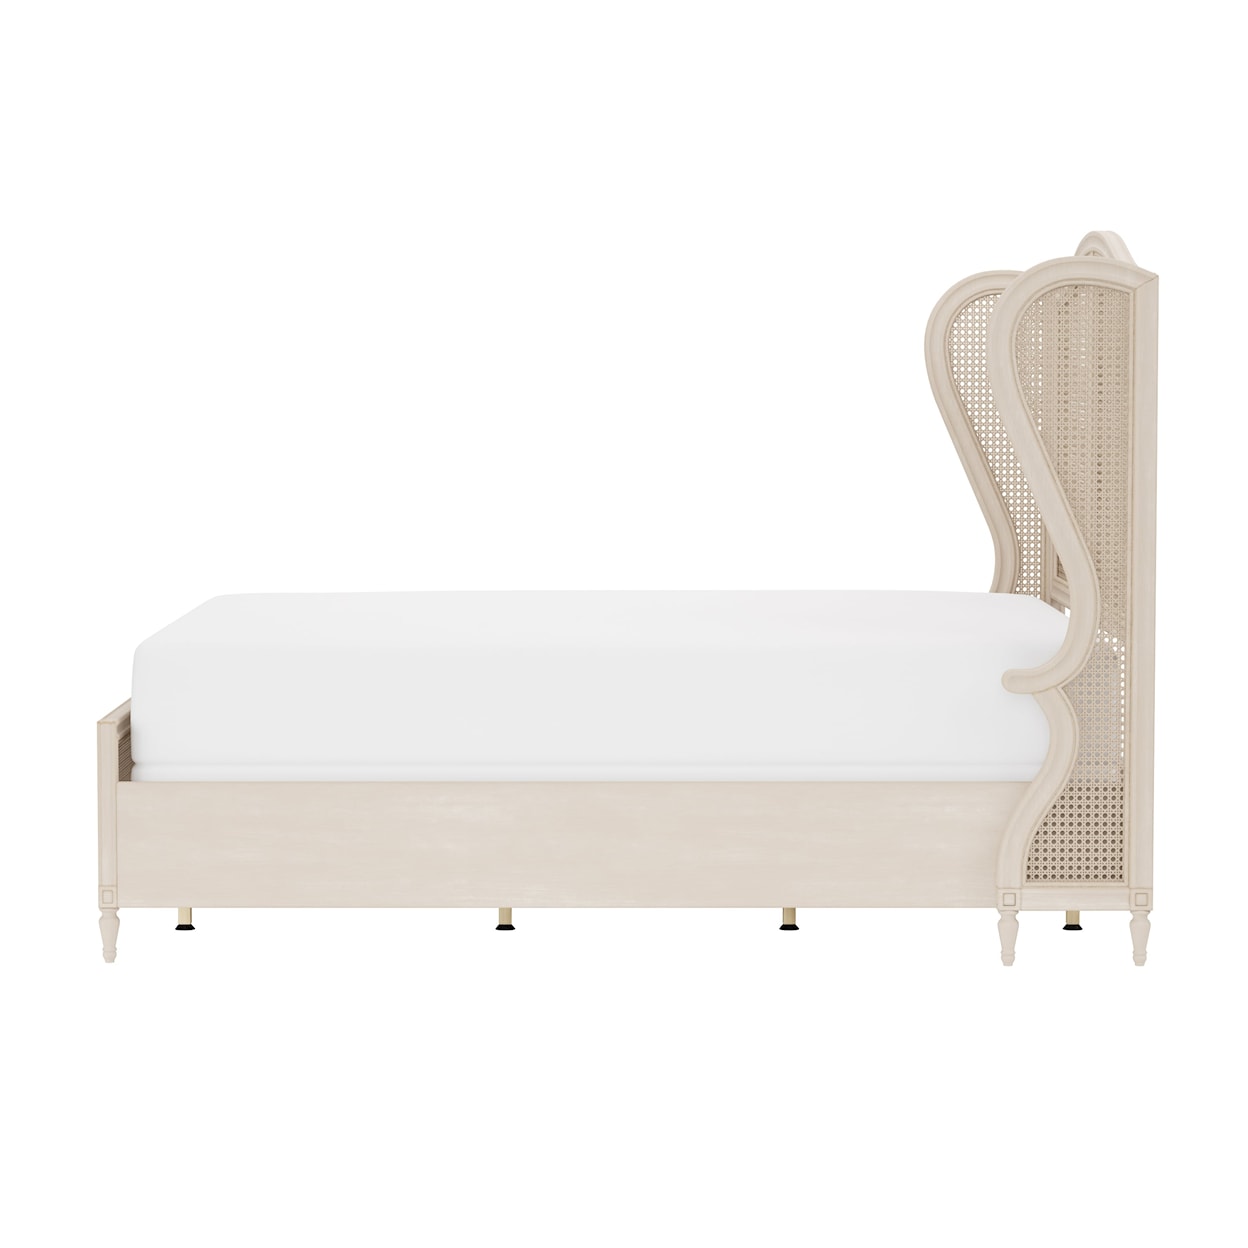 Hillsdale Sausalito Queen Bed